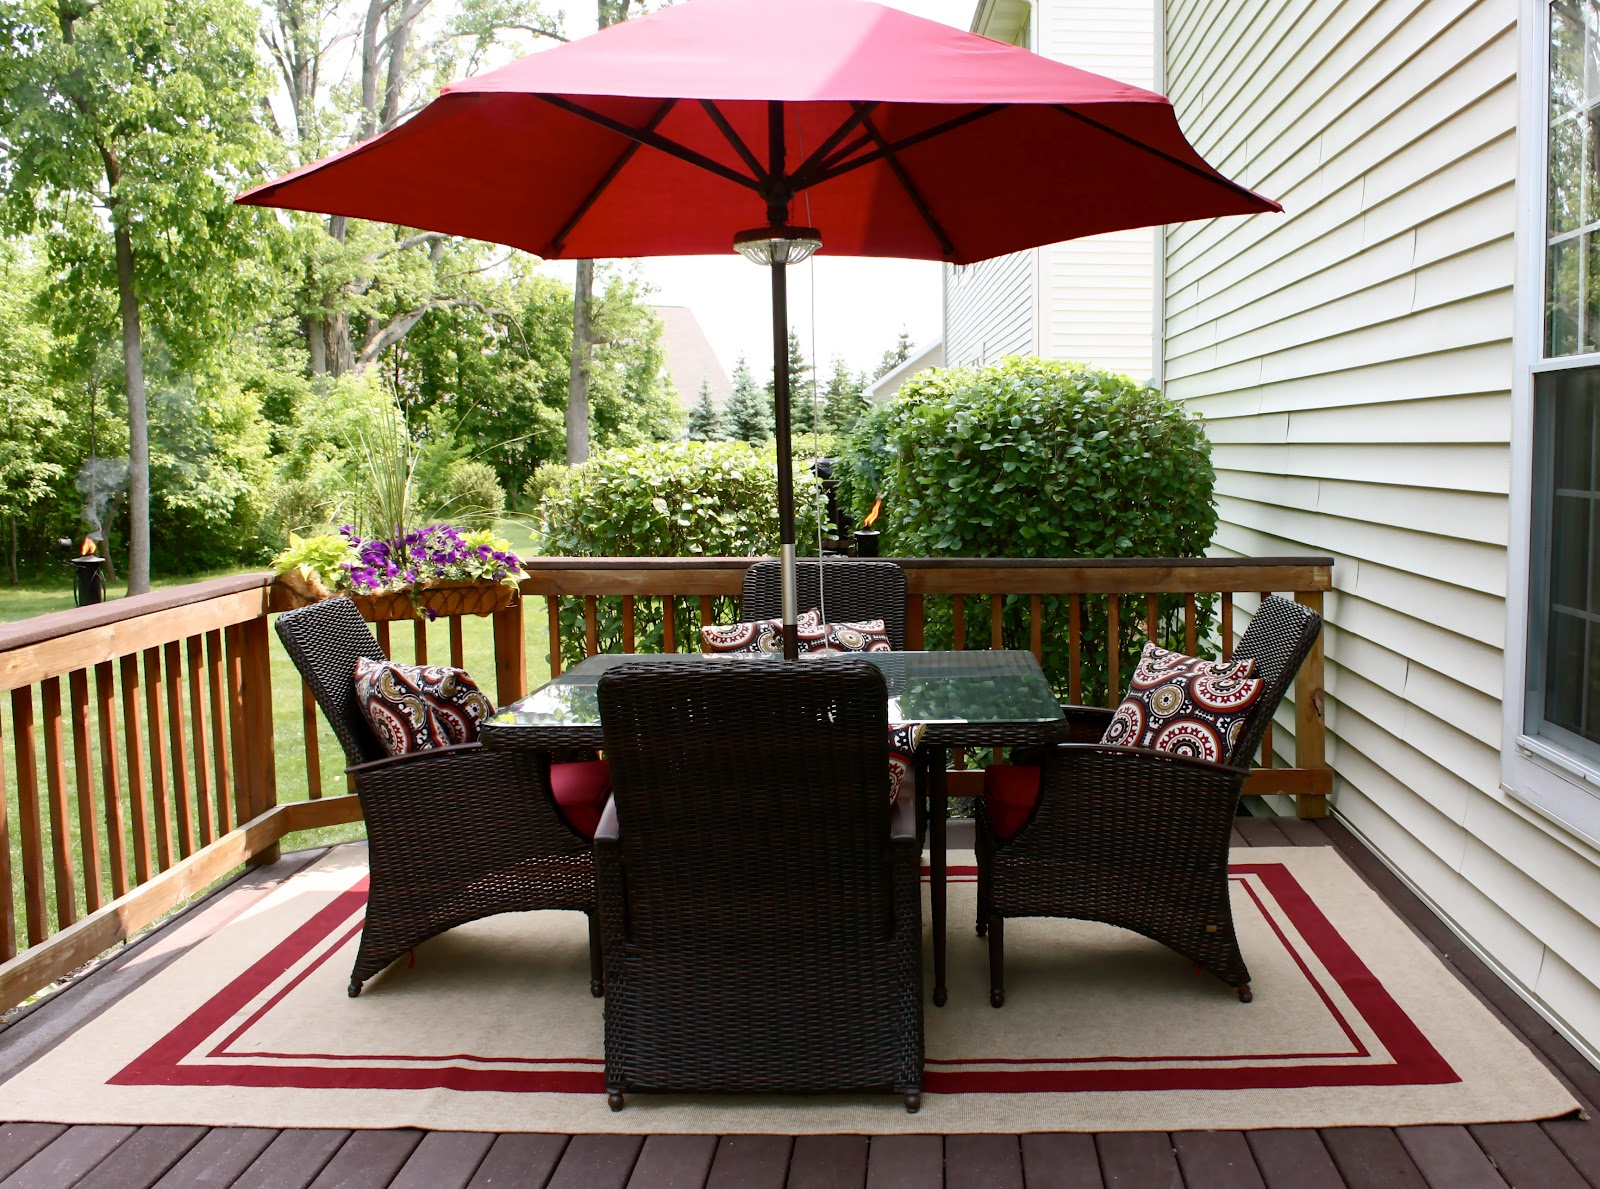 Parasol Design Modern Amazing Parasol Design Combined With Modern Furntiure Design With Comfortable Rug On Wooden Deck Design Plan Idea Outdoor  Pottery Barn Outdoor Furniture Equipping Breezy Patio 